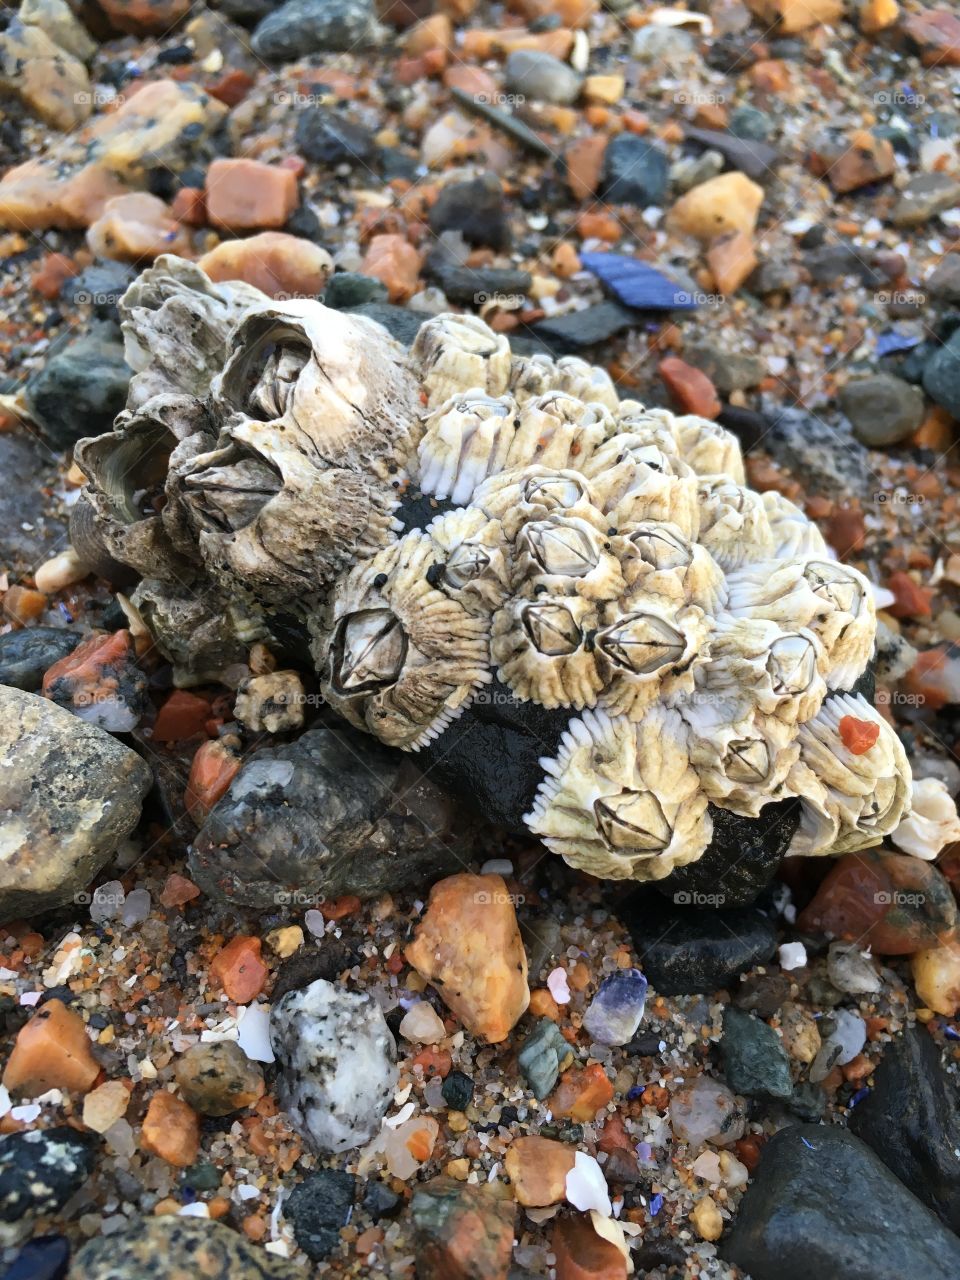 A barnacle encrusted mussel on a bed of colored rocks on a beach on the rugged coast of Maine.